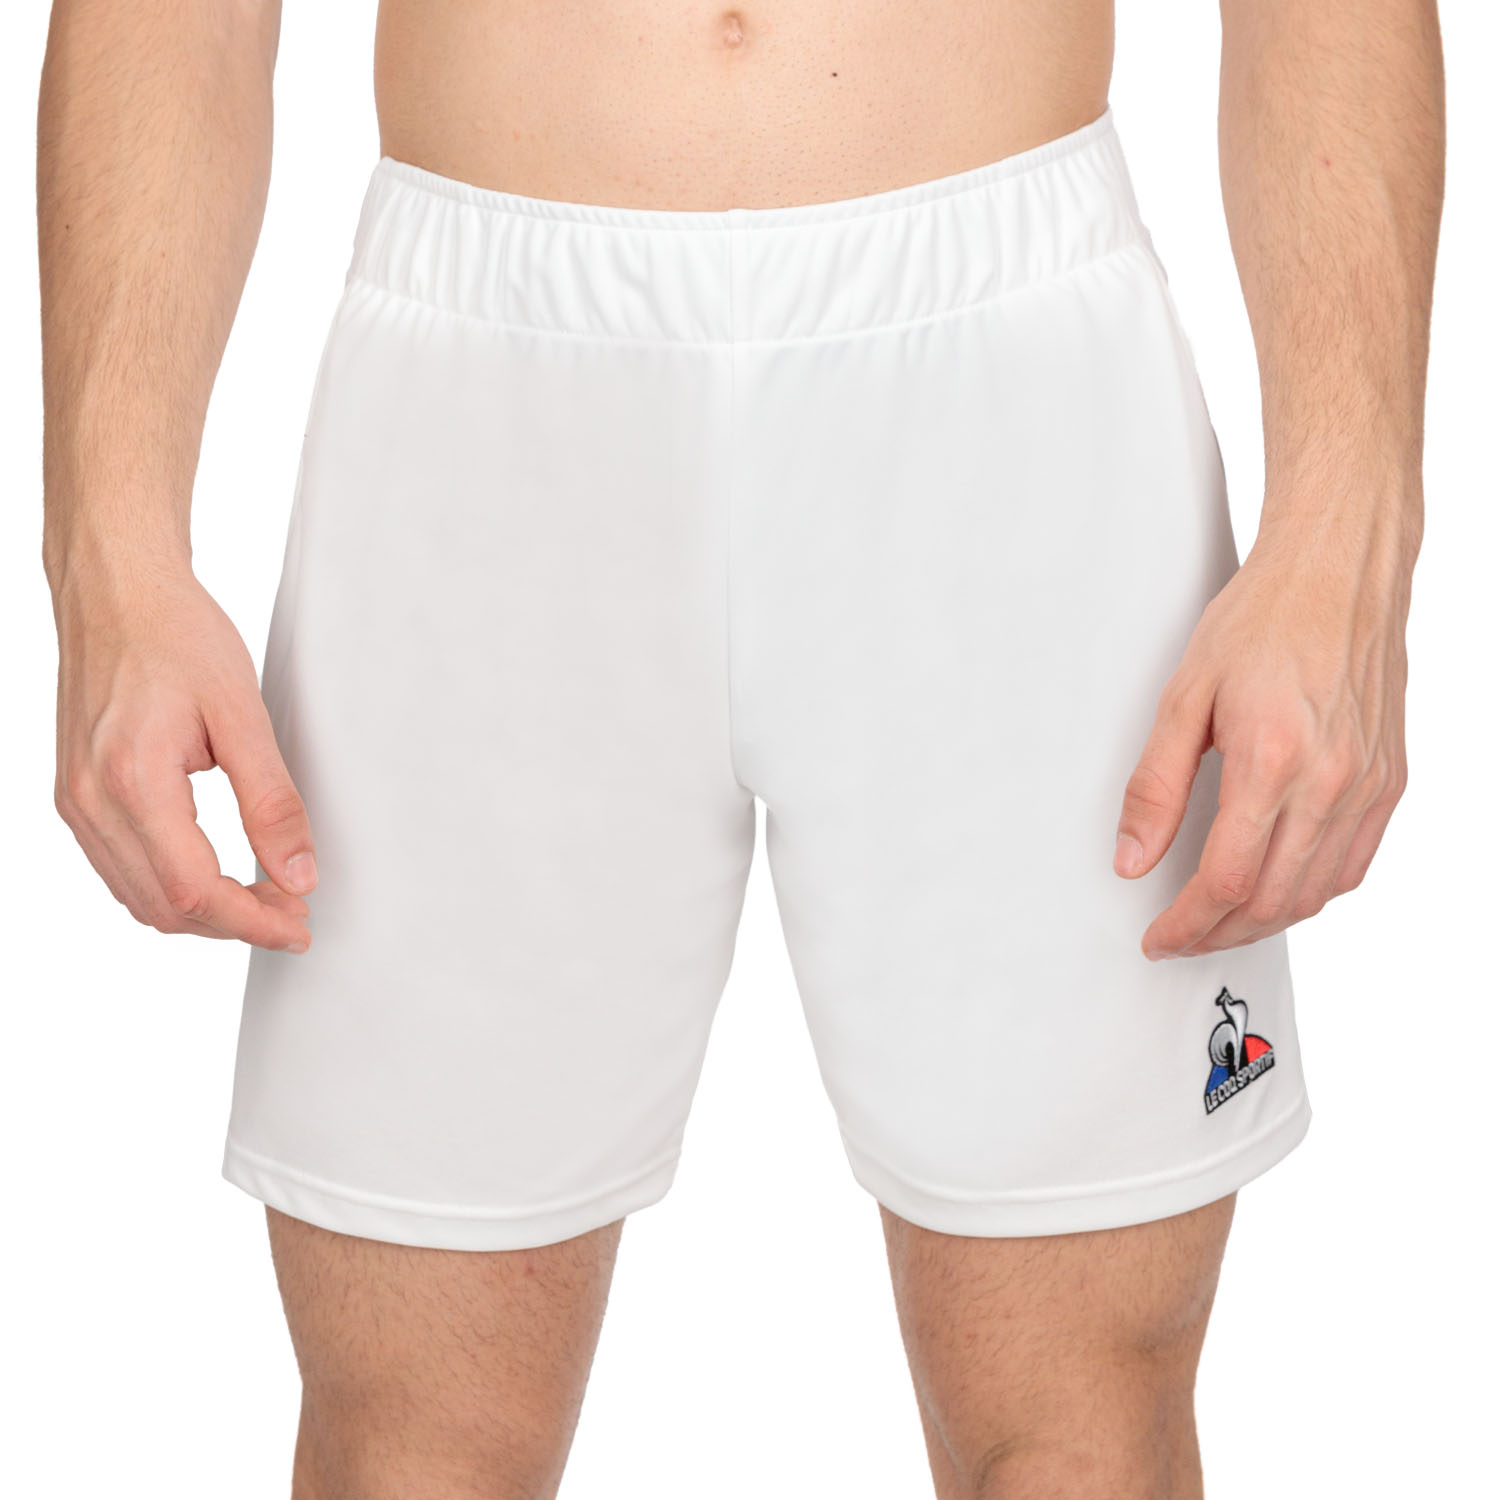 Le Coq Sportif Performance 7in Shorts - New Optical White